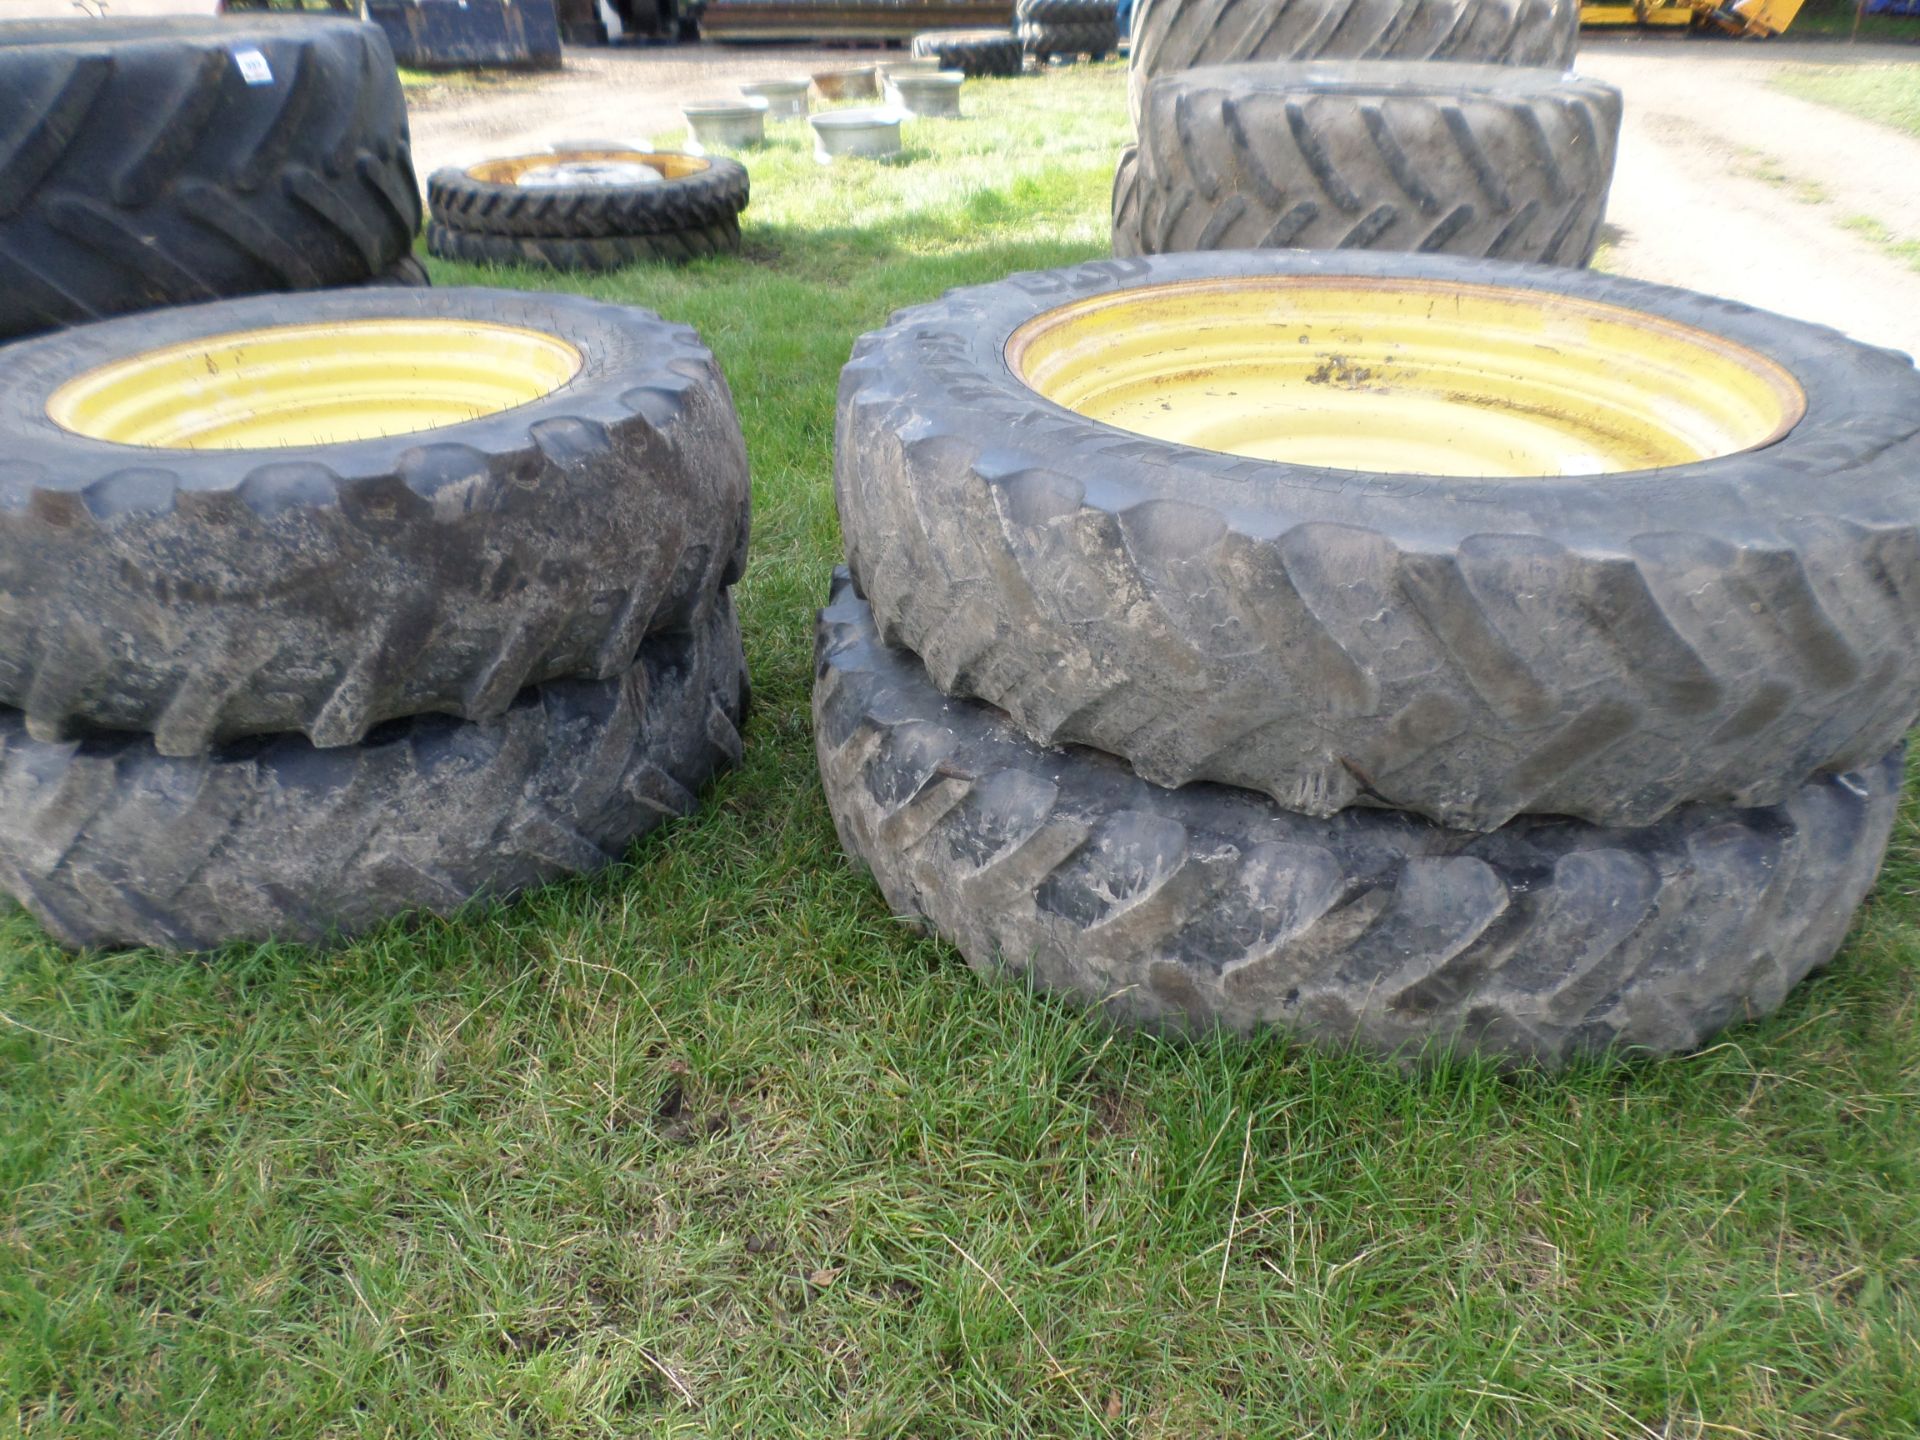 Set of 4 John Deere fixed centre row crop wheels to fit 6020/6030 series, 380/90/46 rears and 380/